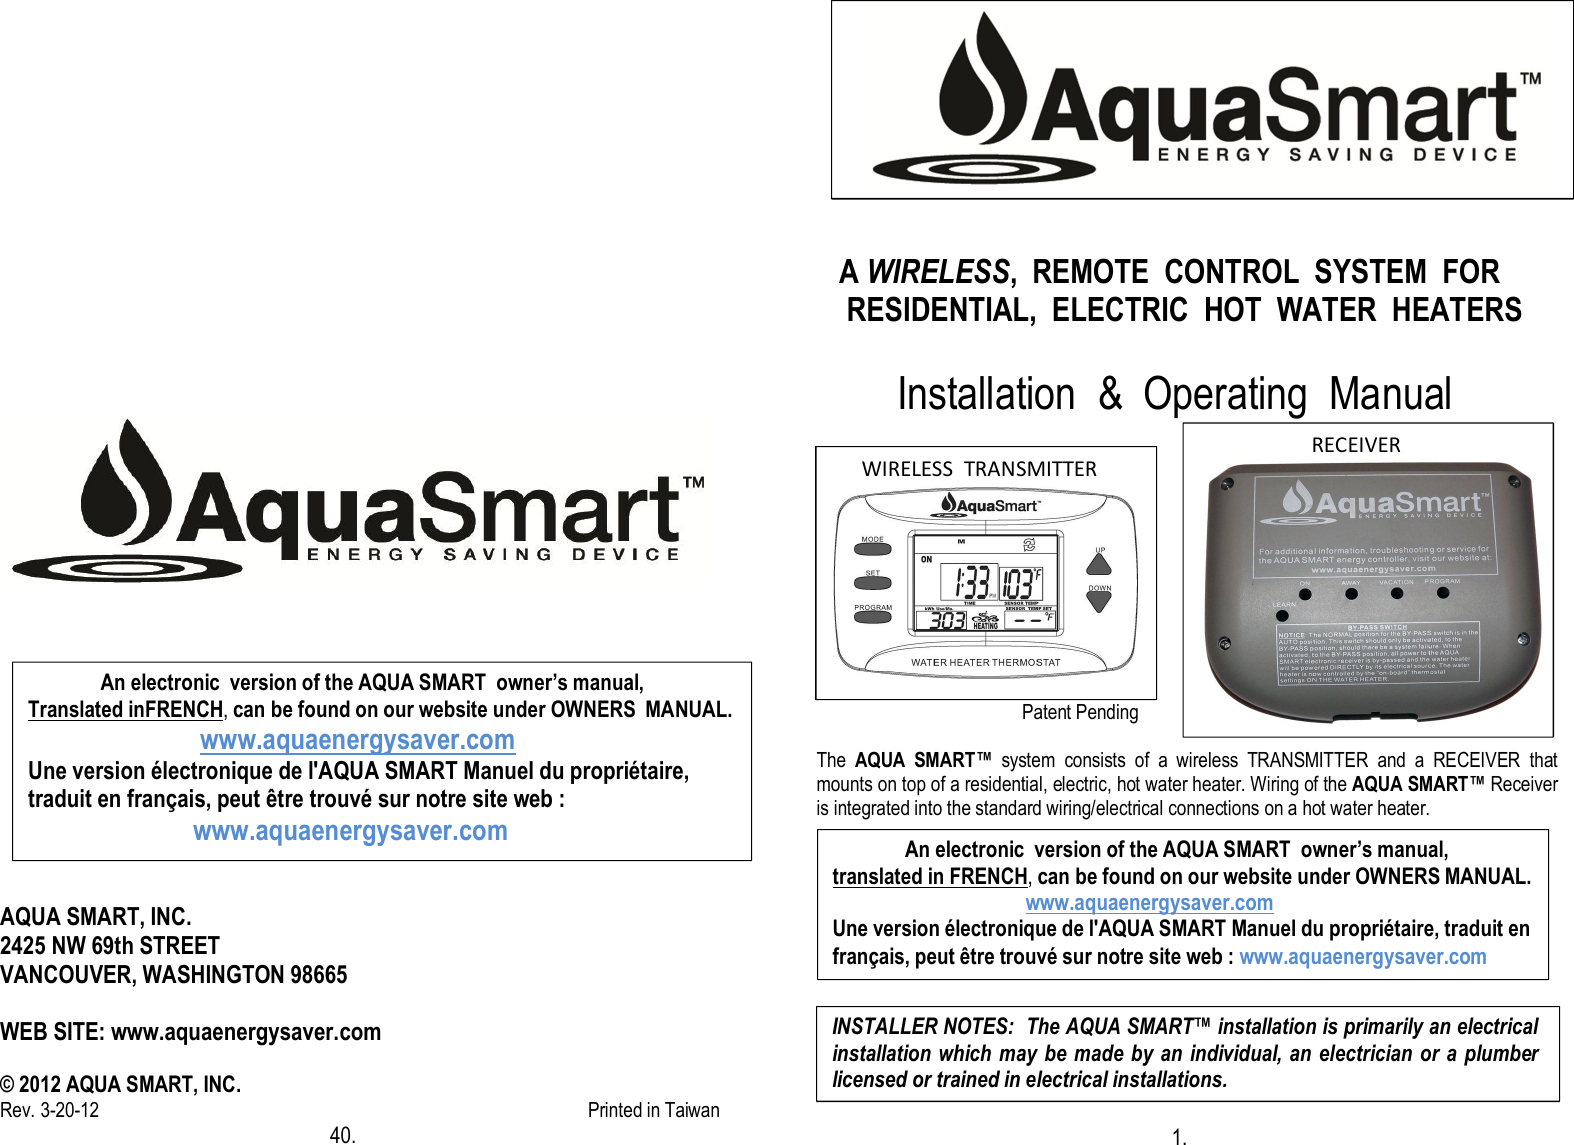                                        AQUA SMART, INC. 2425 NW 69th STREET VANCOUVER, WASHINGTON 98665  WEB SITE: www.aquaenergysaver.com  © 2012 AQUA SMART, INC. Rev. 3-20-12                                                                                                       Printed in Taiwan                                                           40.                                                                                                                                                                                                                                                 A WIRELESS,  REMOTE  CONTROL  SYSTEM  FOR          RESIDENTIAL,  ELECTRIC  HOT  WATER  HEATERS          Installation  &amp;  Operating  Manual                                                 Patent Pending  The  AQUA  SMART™  system  consists  of  a  wireless  TRANSMITTER  and  a  RECEIVER  that mounts on top of a residential, electric, hot water heater. Wiring of the AQUA SMART™ Receiver is integrated into the standard wiring/electrical connections on a hot water heater.                                                                      1.                                                                                                                         RECEIVER        WIRELESS  TRANSMITTER                    An electronic  version of the AQUA SMART  owner’s manual,  translated in FRENCH, can be found on our website under OWNERS MANUAL.                                      www.aquaenergysaver.com Une version électronique de l&apos;AQUA SMART Manuel du propriétaire, traduit en français, peut être trouvé sur notre site web : www.aquaenergysaver.com INSTALLER NOTES:  The AQUA SMART™ installation is primarily an electrical installation which may be made by an individual, an electrician or a plumber licensed or trained in electrical installations.               An electronic  version of the AQUA SMART  owner’s manual,  Translated inFRENCH, can be found on our website under OWNERS  MANUAL.                                  www.aquaenergysaver.com Une version électronique de l&apos;AQUA SMART Manuel du propriétaire, traduit en français, peut être trouvé sur notre site web :                               www.aquaenergysaver.com 